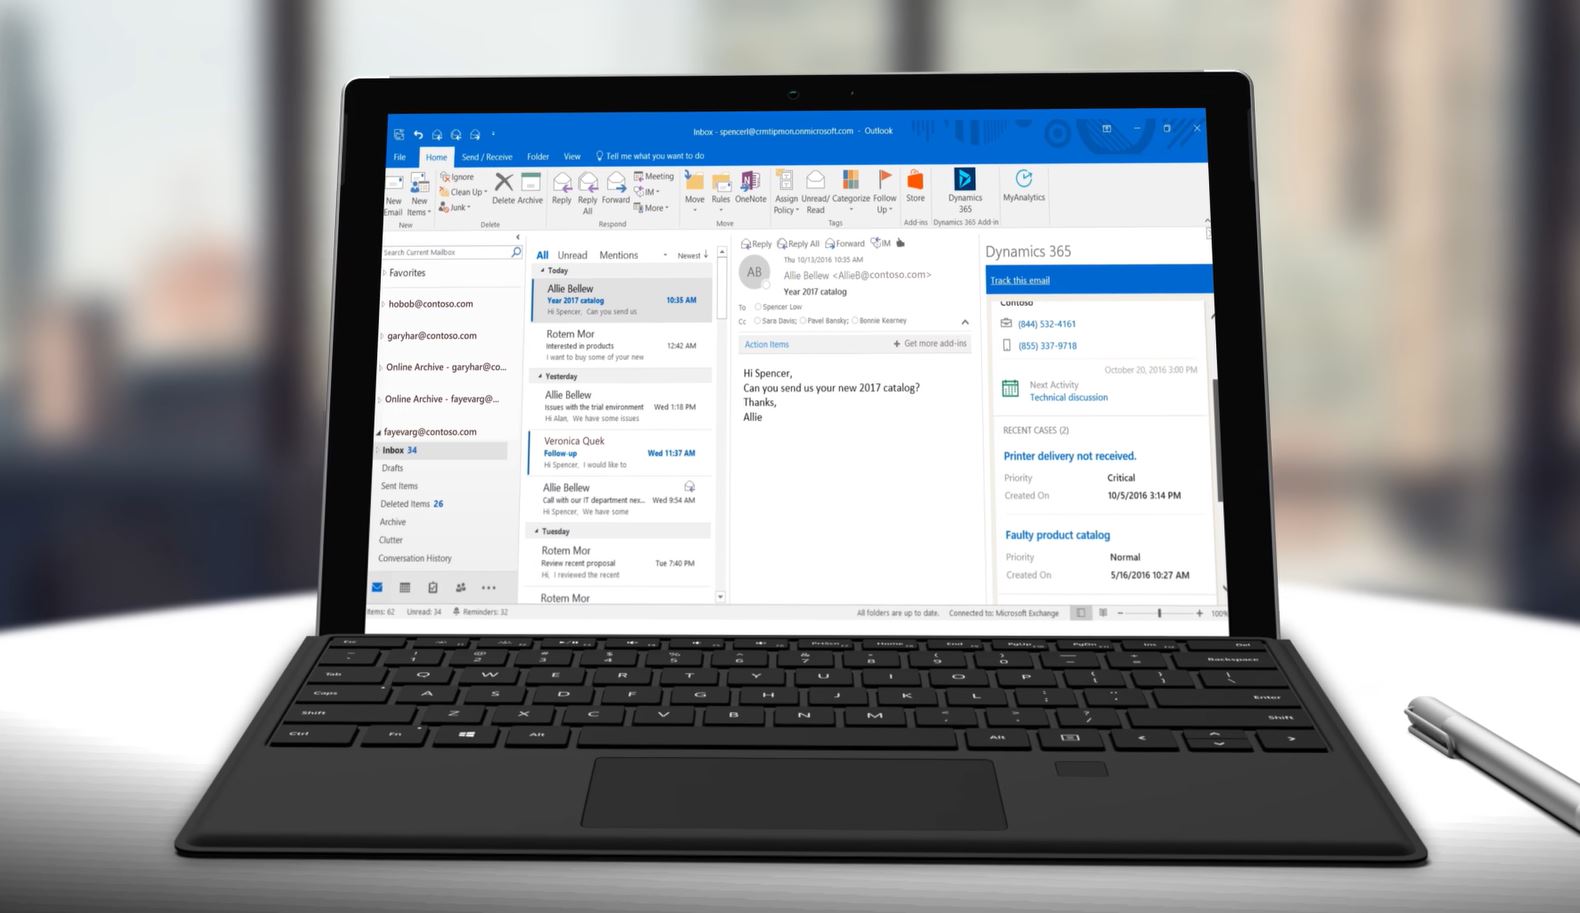 microsoft office with outlook one time purchase